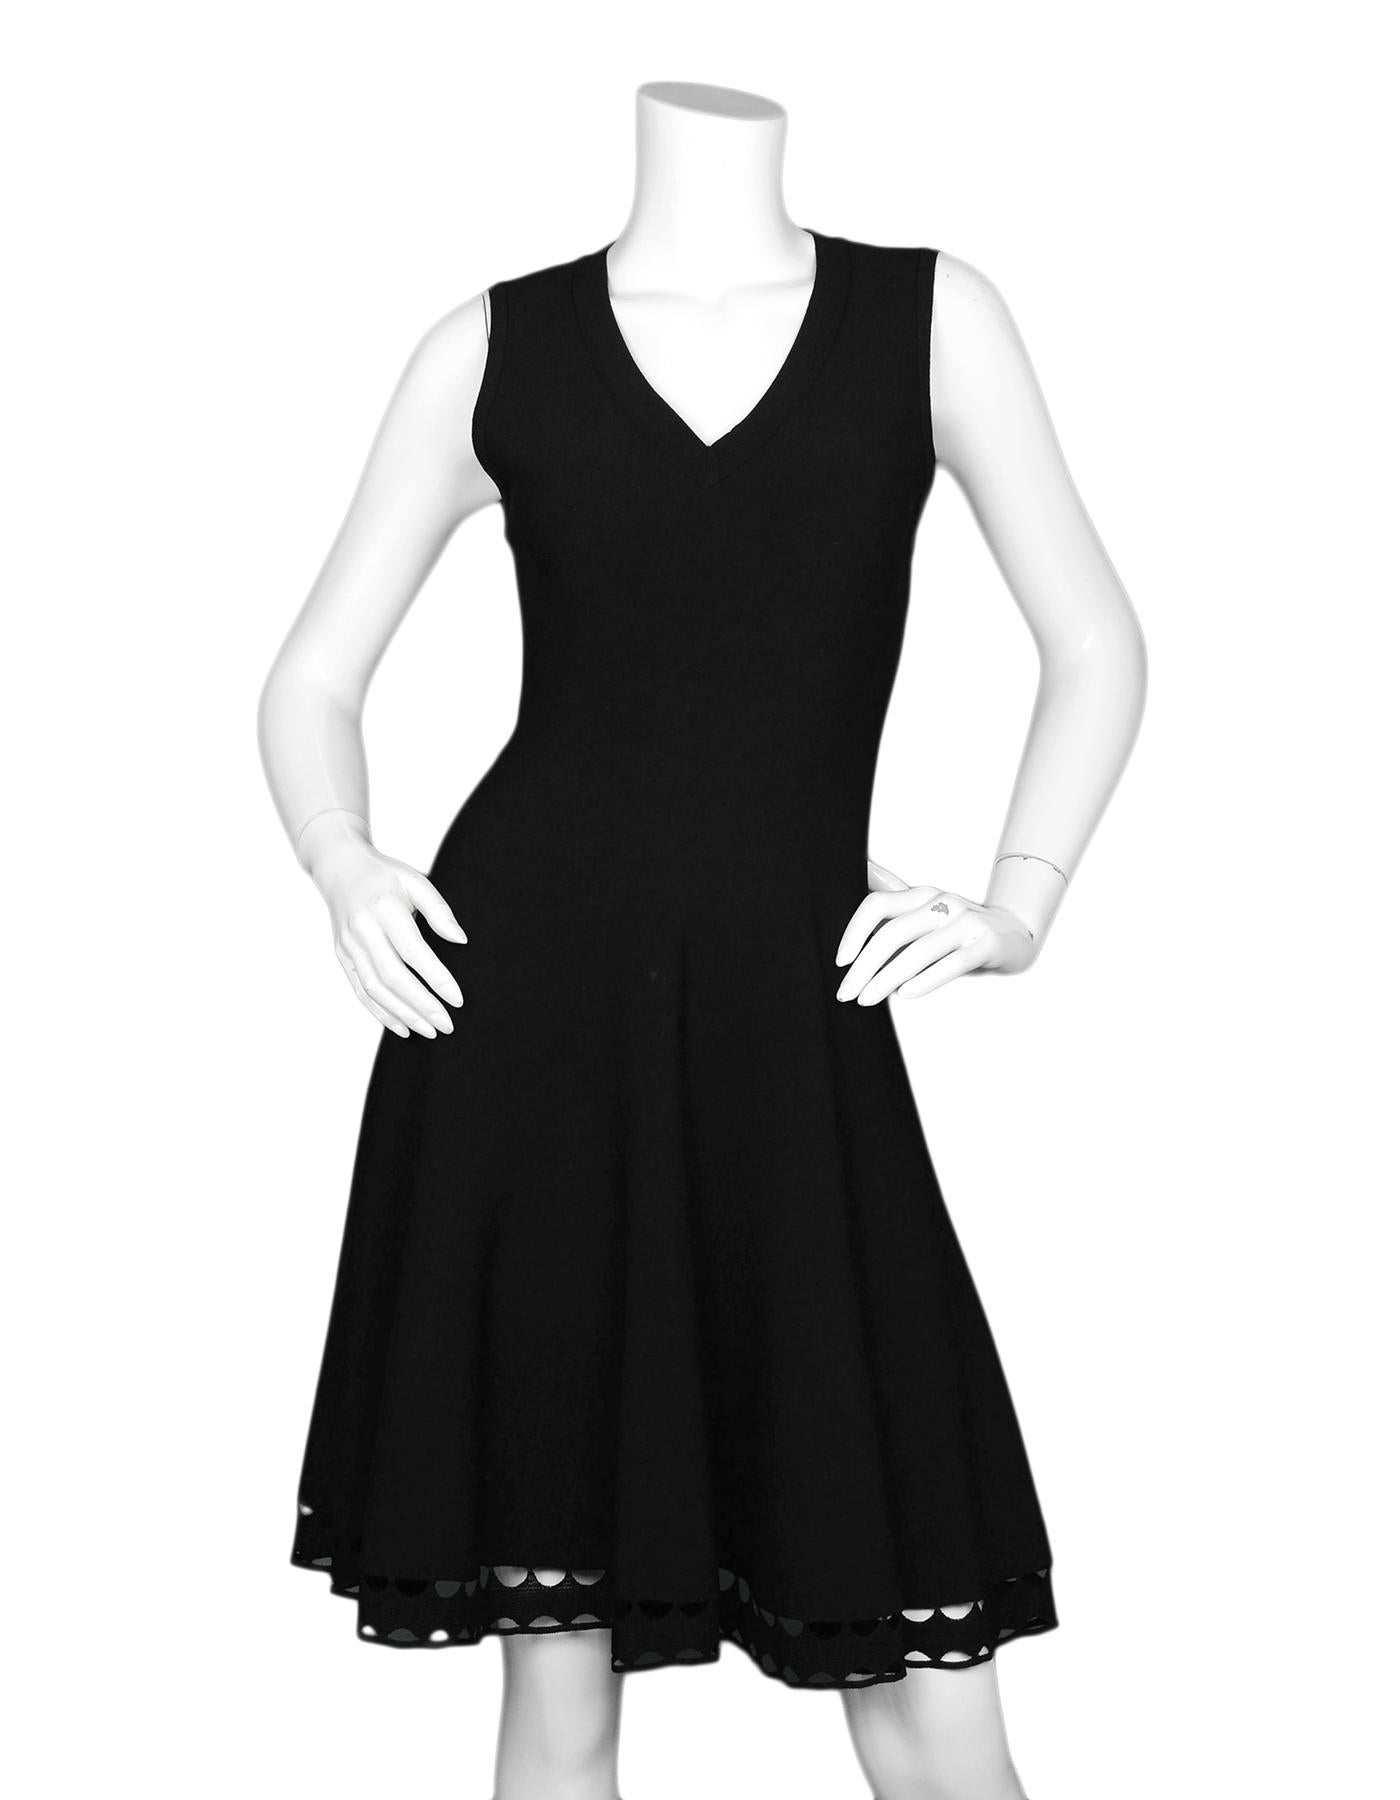 Alaia Black Fit & Flare V Neck Sleeveless Dress W/ Crochet Hem Sz 42

Made In:  Italy
Color: Black
Materials: 82% viscose, 10% polyester, 6% nylon 2% elastodiene
Opening/Closure: Hidden back zip
Overall Condition: Excellent pre-owned condition